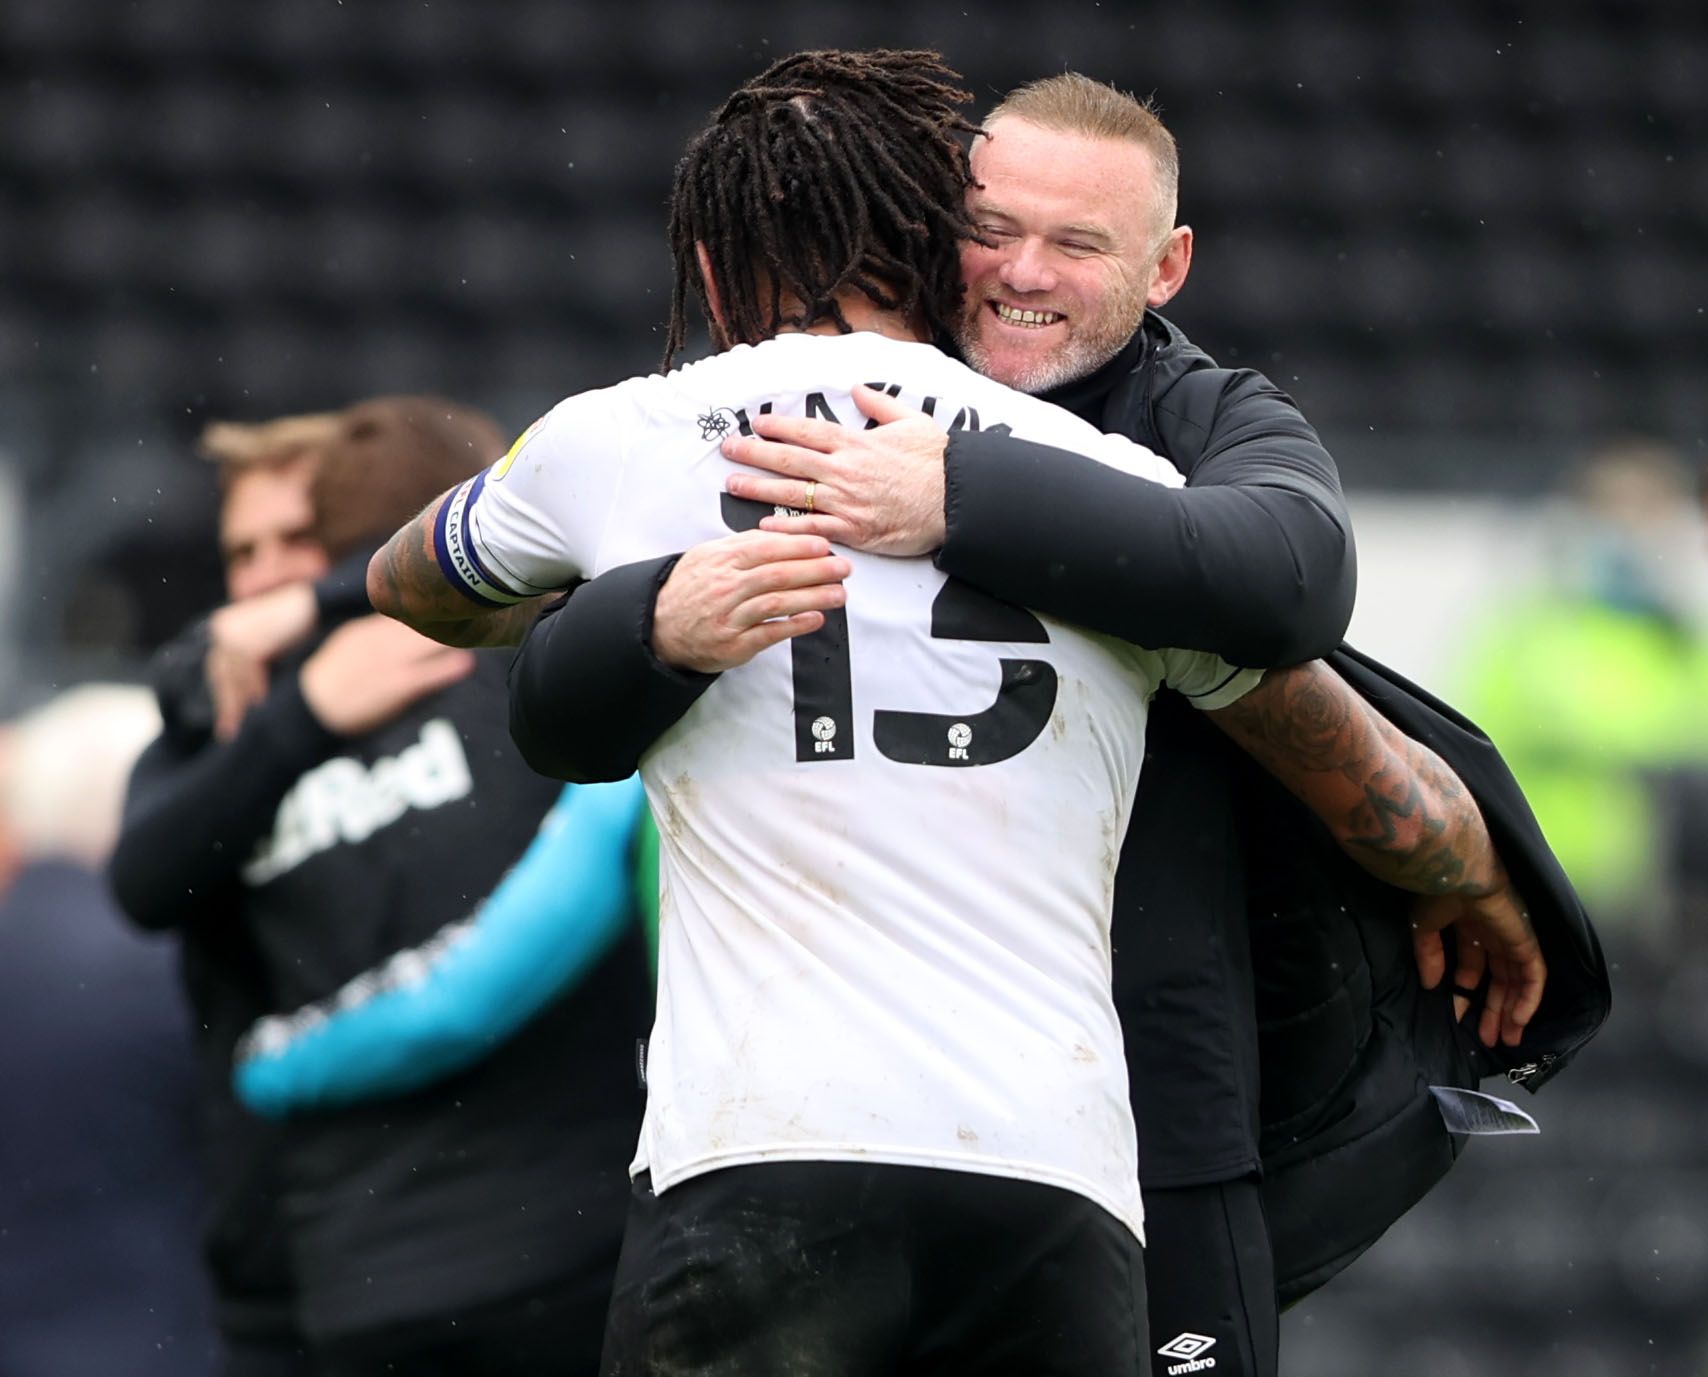 Soccer Football - Championship - Derby County v Sheffield Wednesday - Pride Park, Derby, Britain - May 8, 2021 Derby County manager Wayne Rooney celebrates after the match with Colin Kazim-Richards Action Images via Reuters/Molly Darlington EDITORIAL USE ONLY. No use with unauthorized audio, video, data, fixture lists, club/league logos or 'live' services. Online in-match use limited to 75 images, no video emulation. No use in betting, games or single club /league/player publications.  Please co